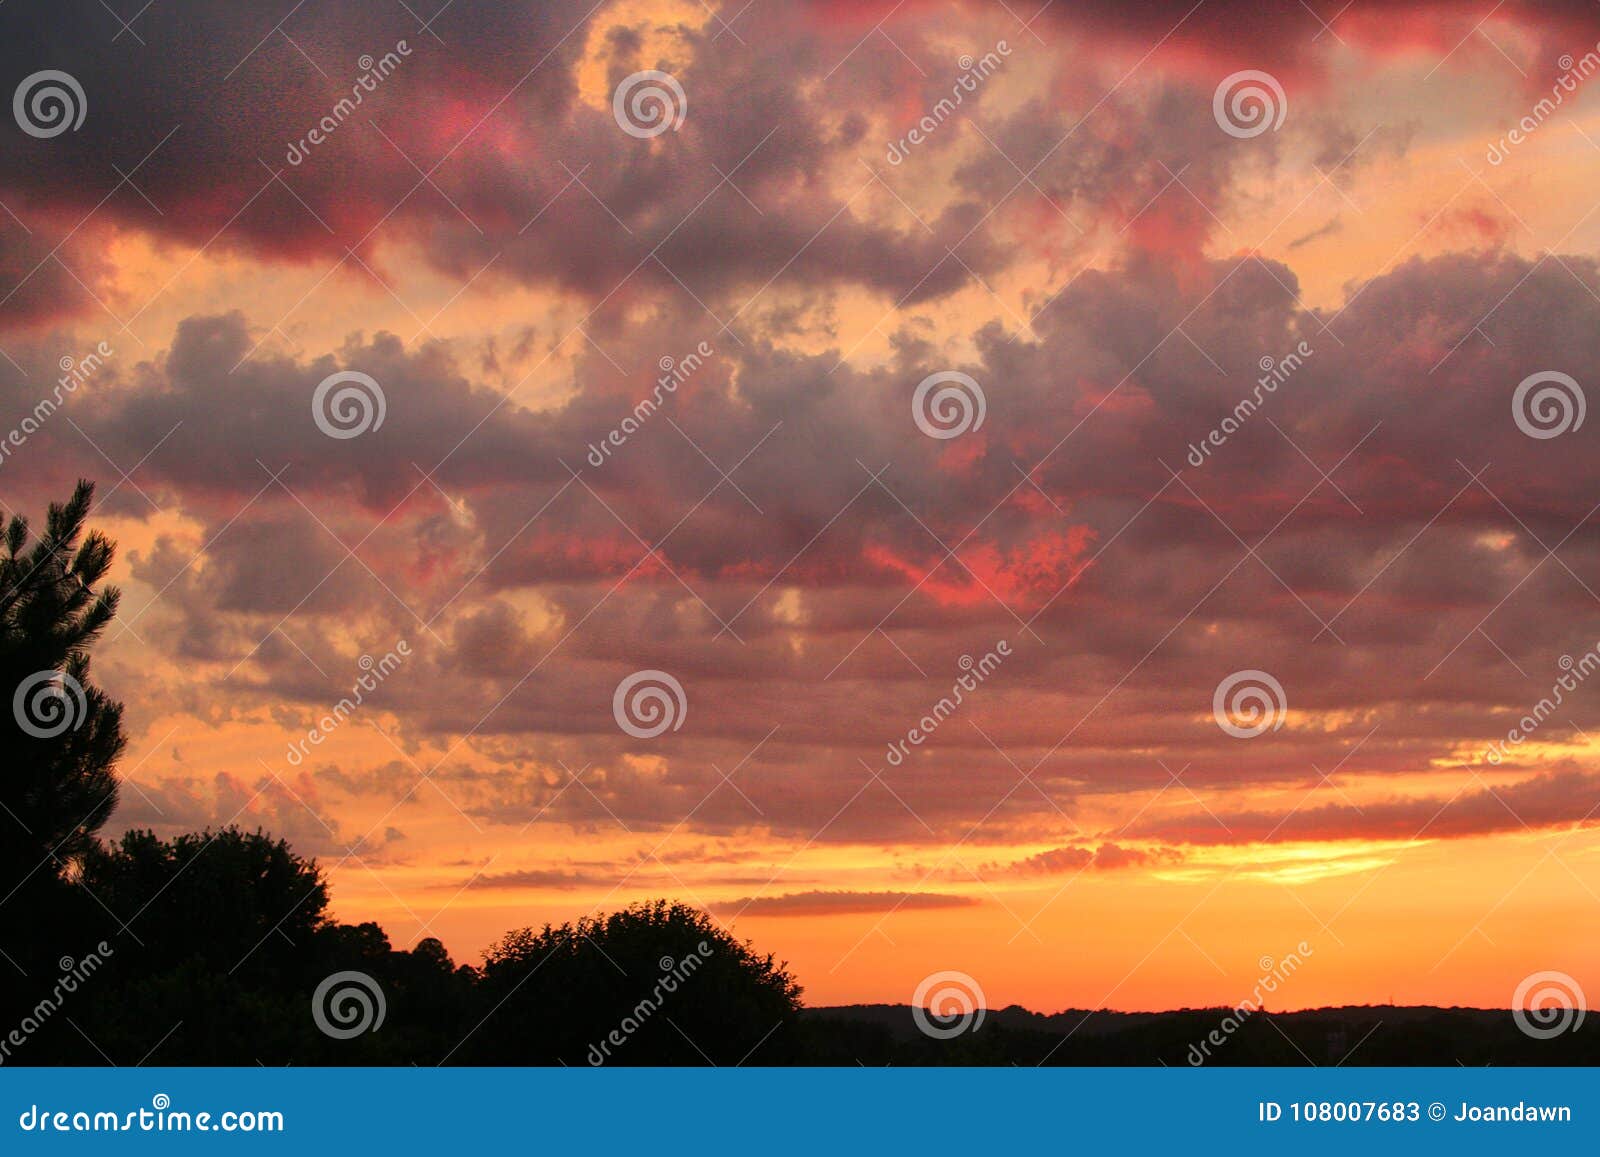 Brilliant Sunset With Clouds Stock Image Image Of Pink Large 108007683